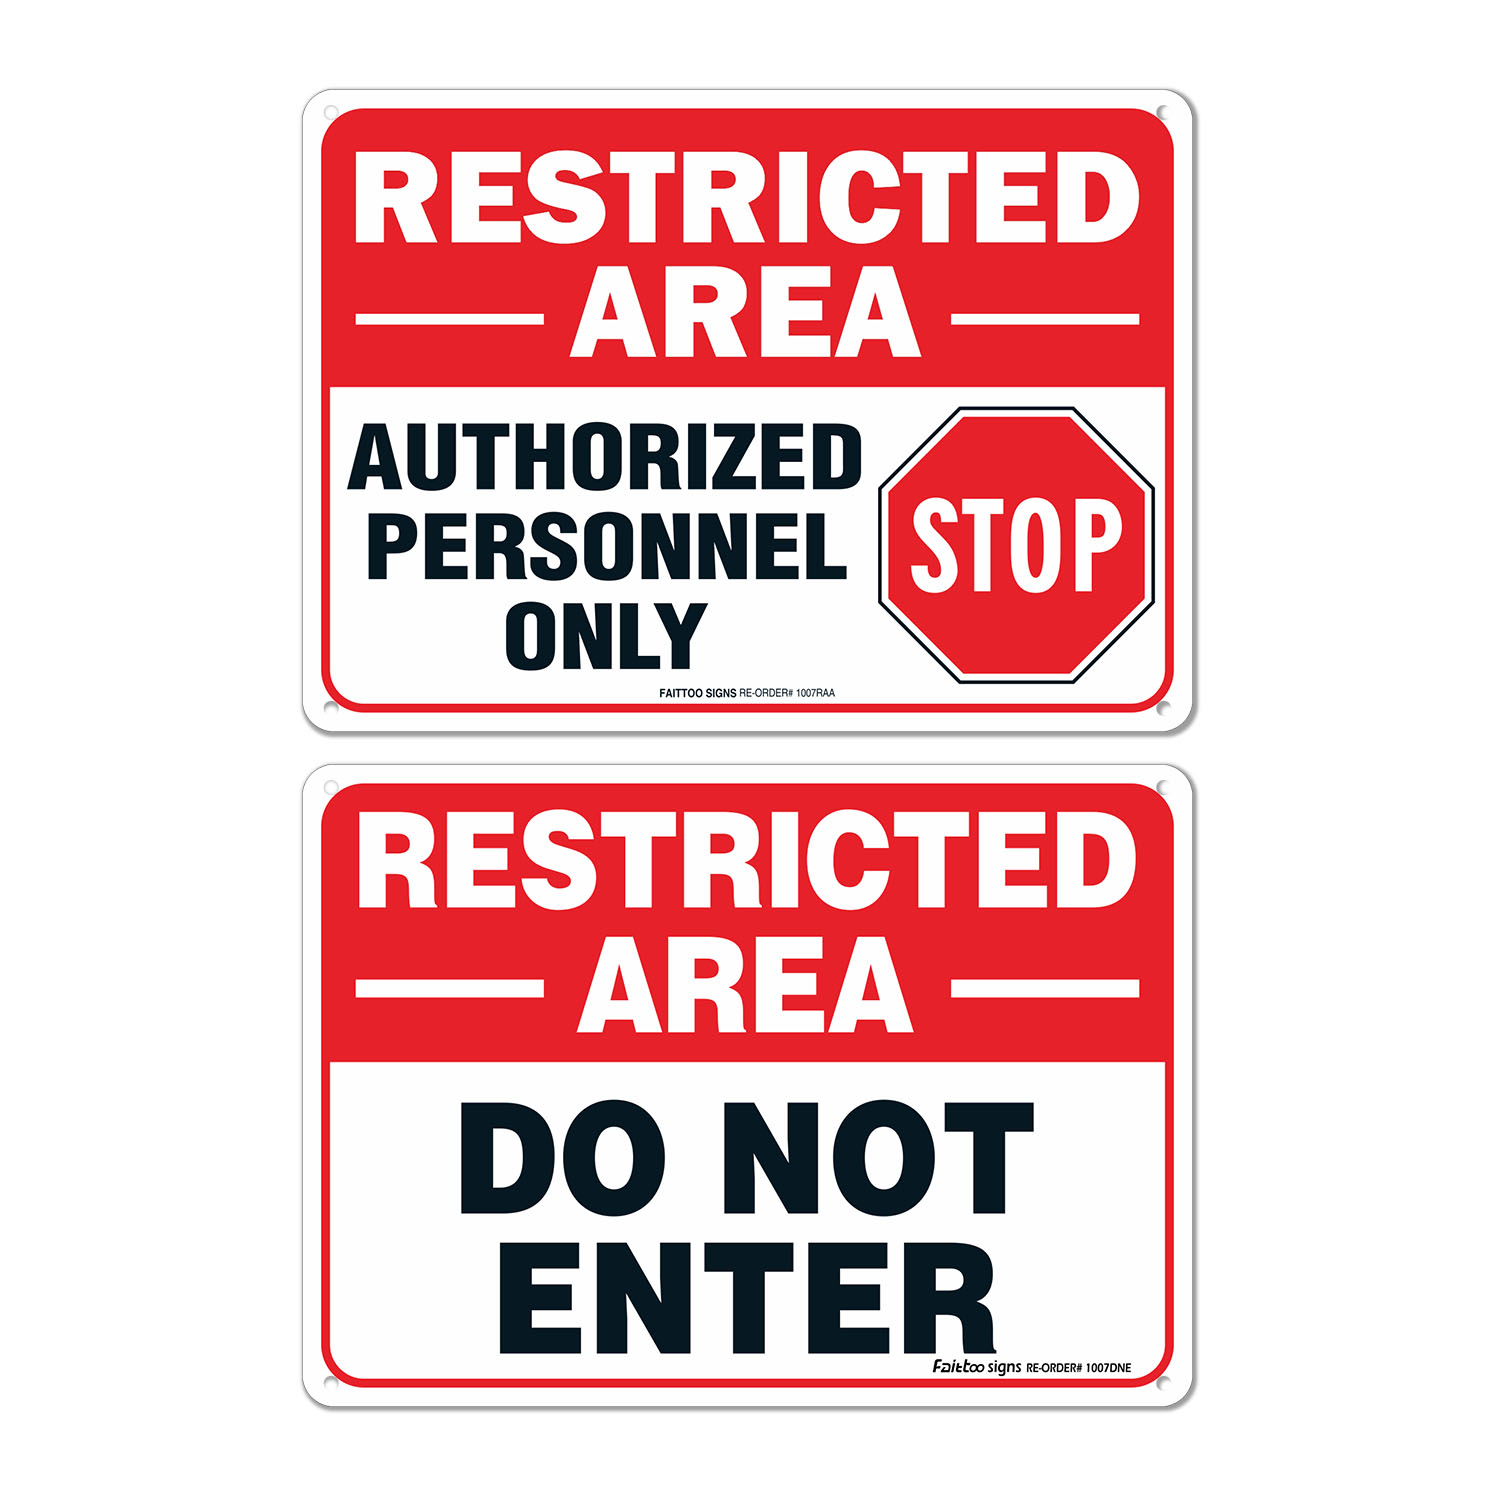 Faittoo Restricted Area Sign Authorized Personnel Only Sign, Do Not Enter Sign, （2 pack）10 x 7 Inches. 0.40 Rust Free Aluminum, UV Protected, Fade Resistant, Easy to Mount